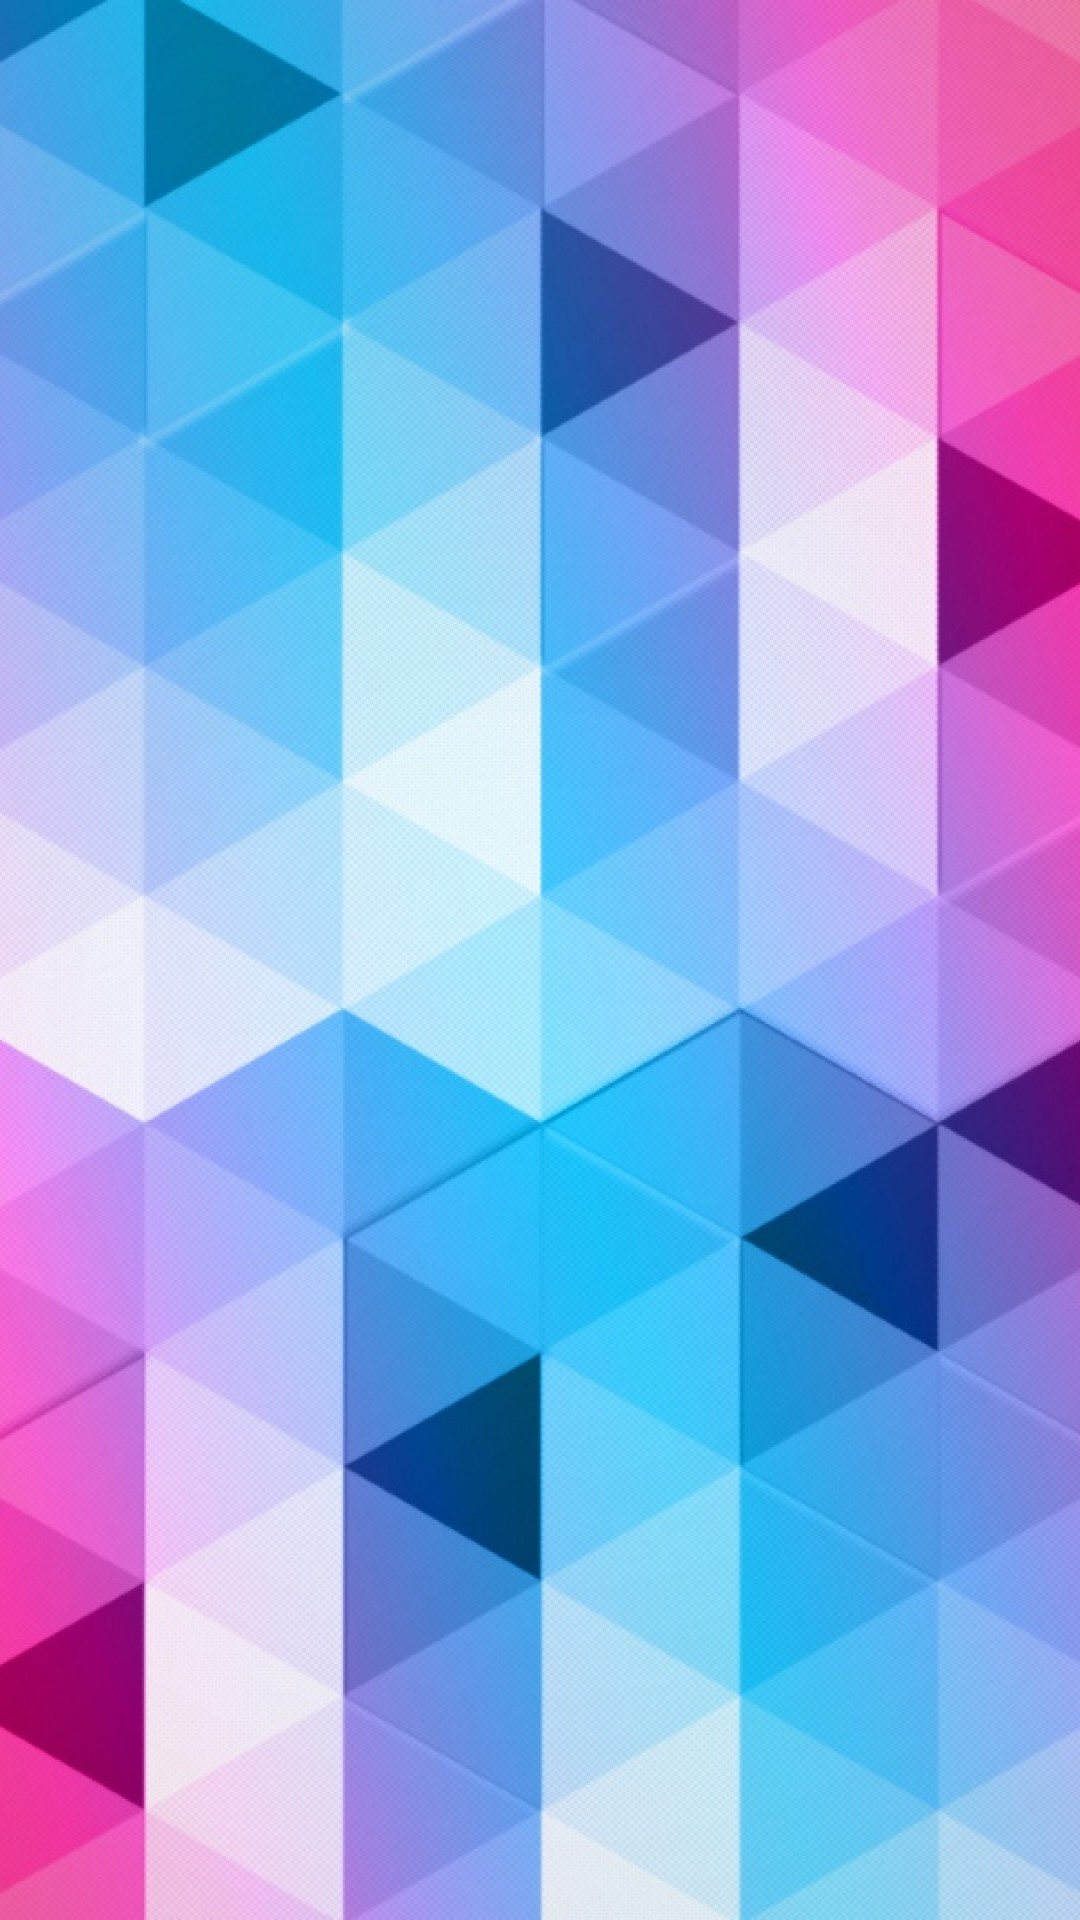 Colorful Geometric Patterns Iphone Wallpapers